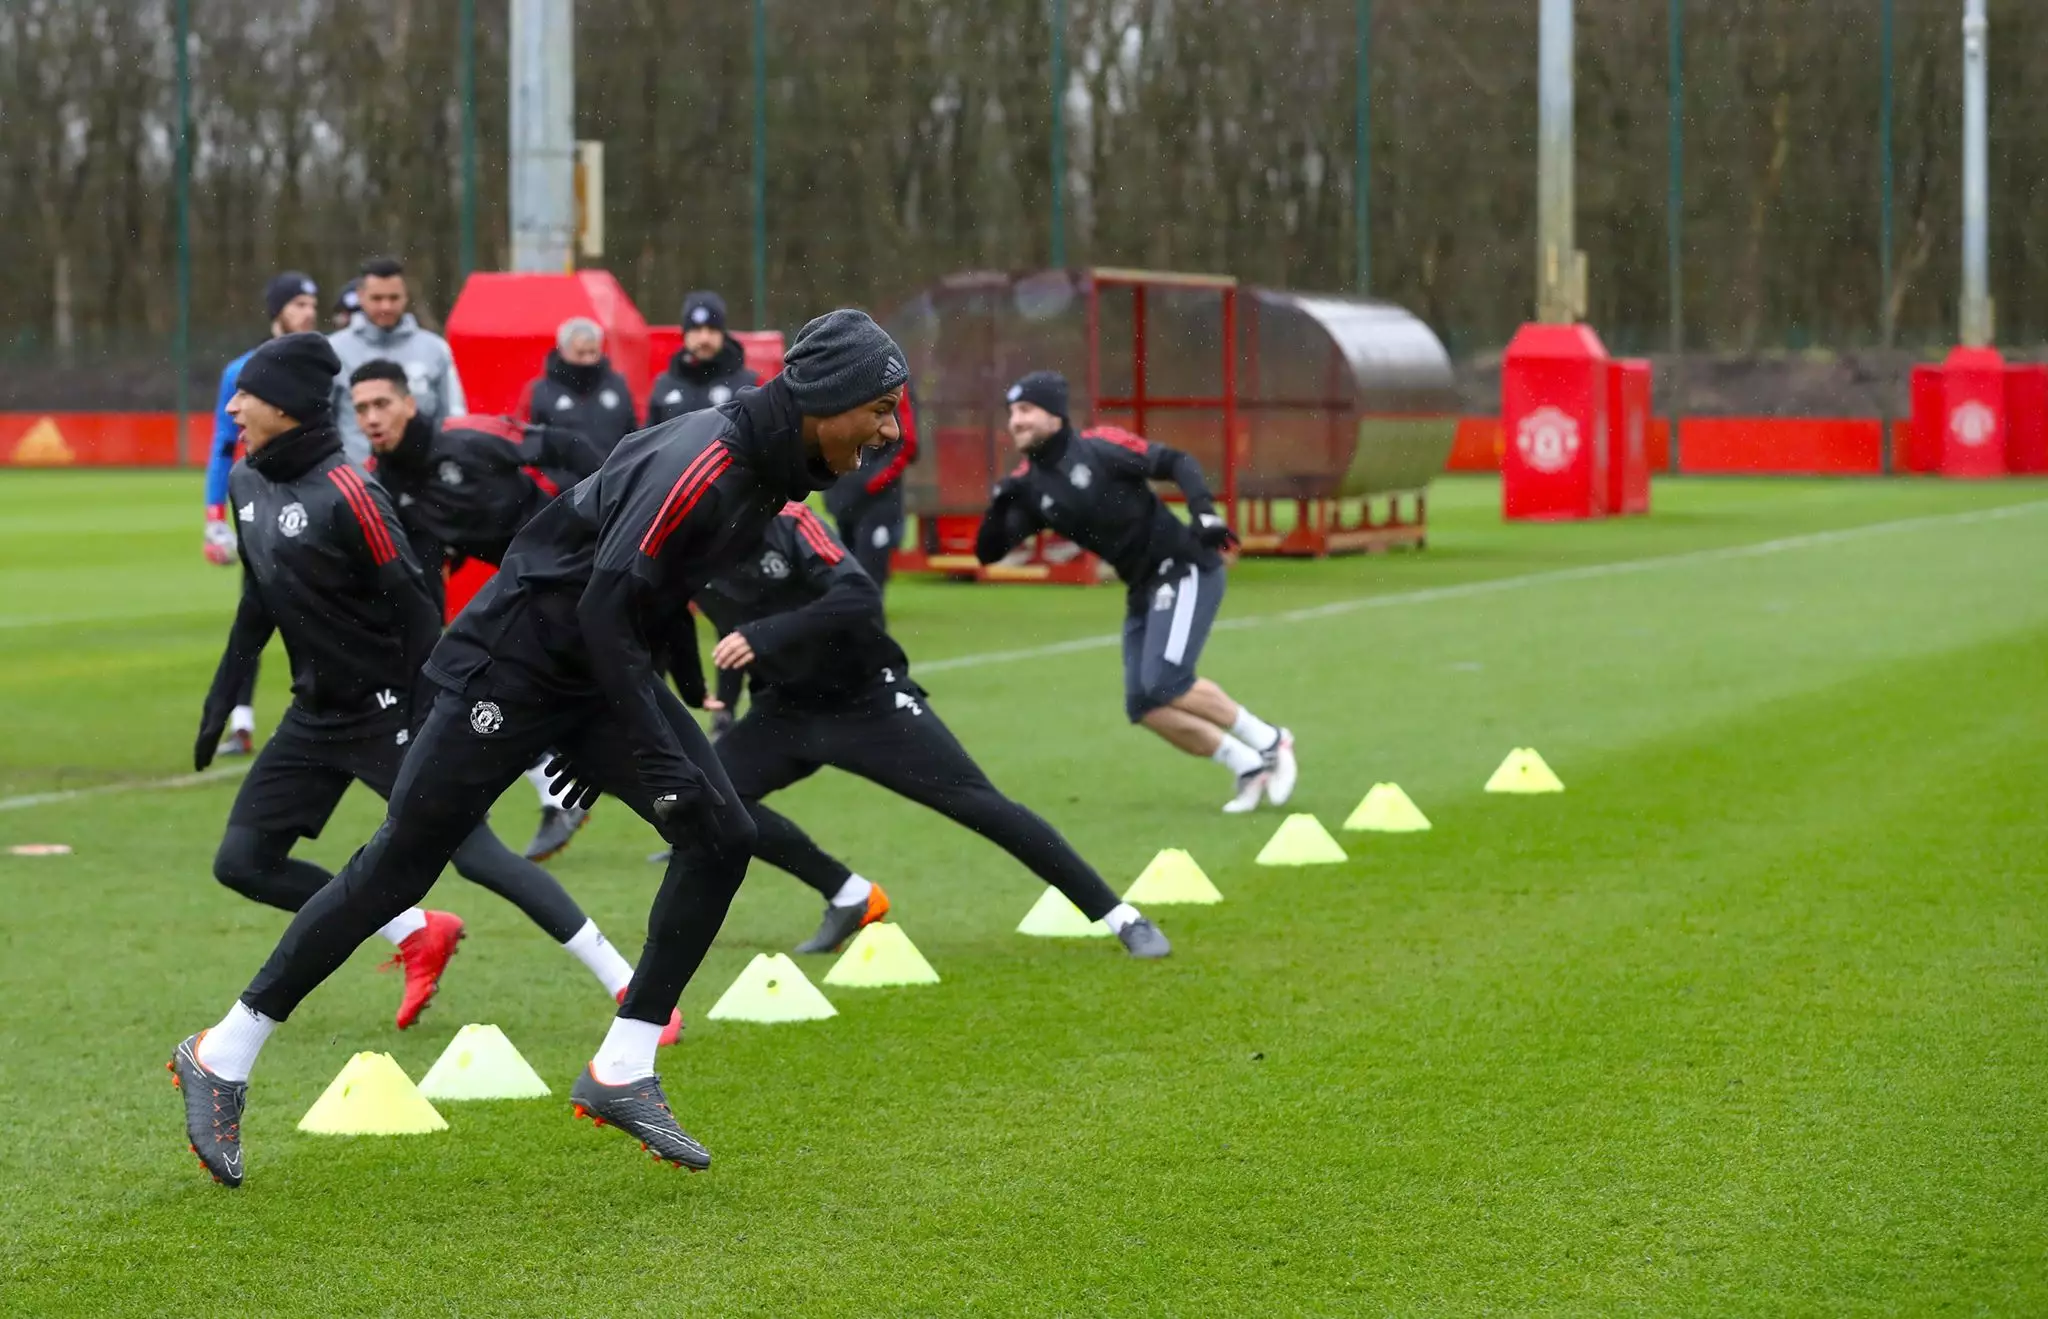 United players going through their paces. Image: PA